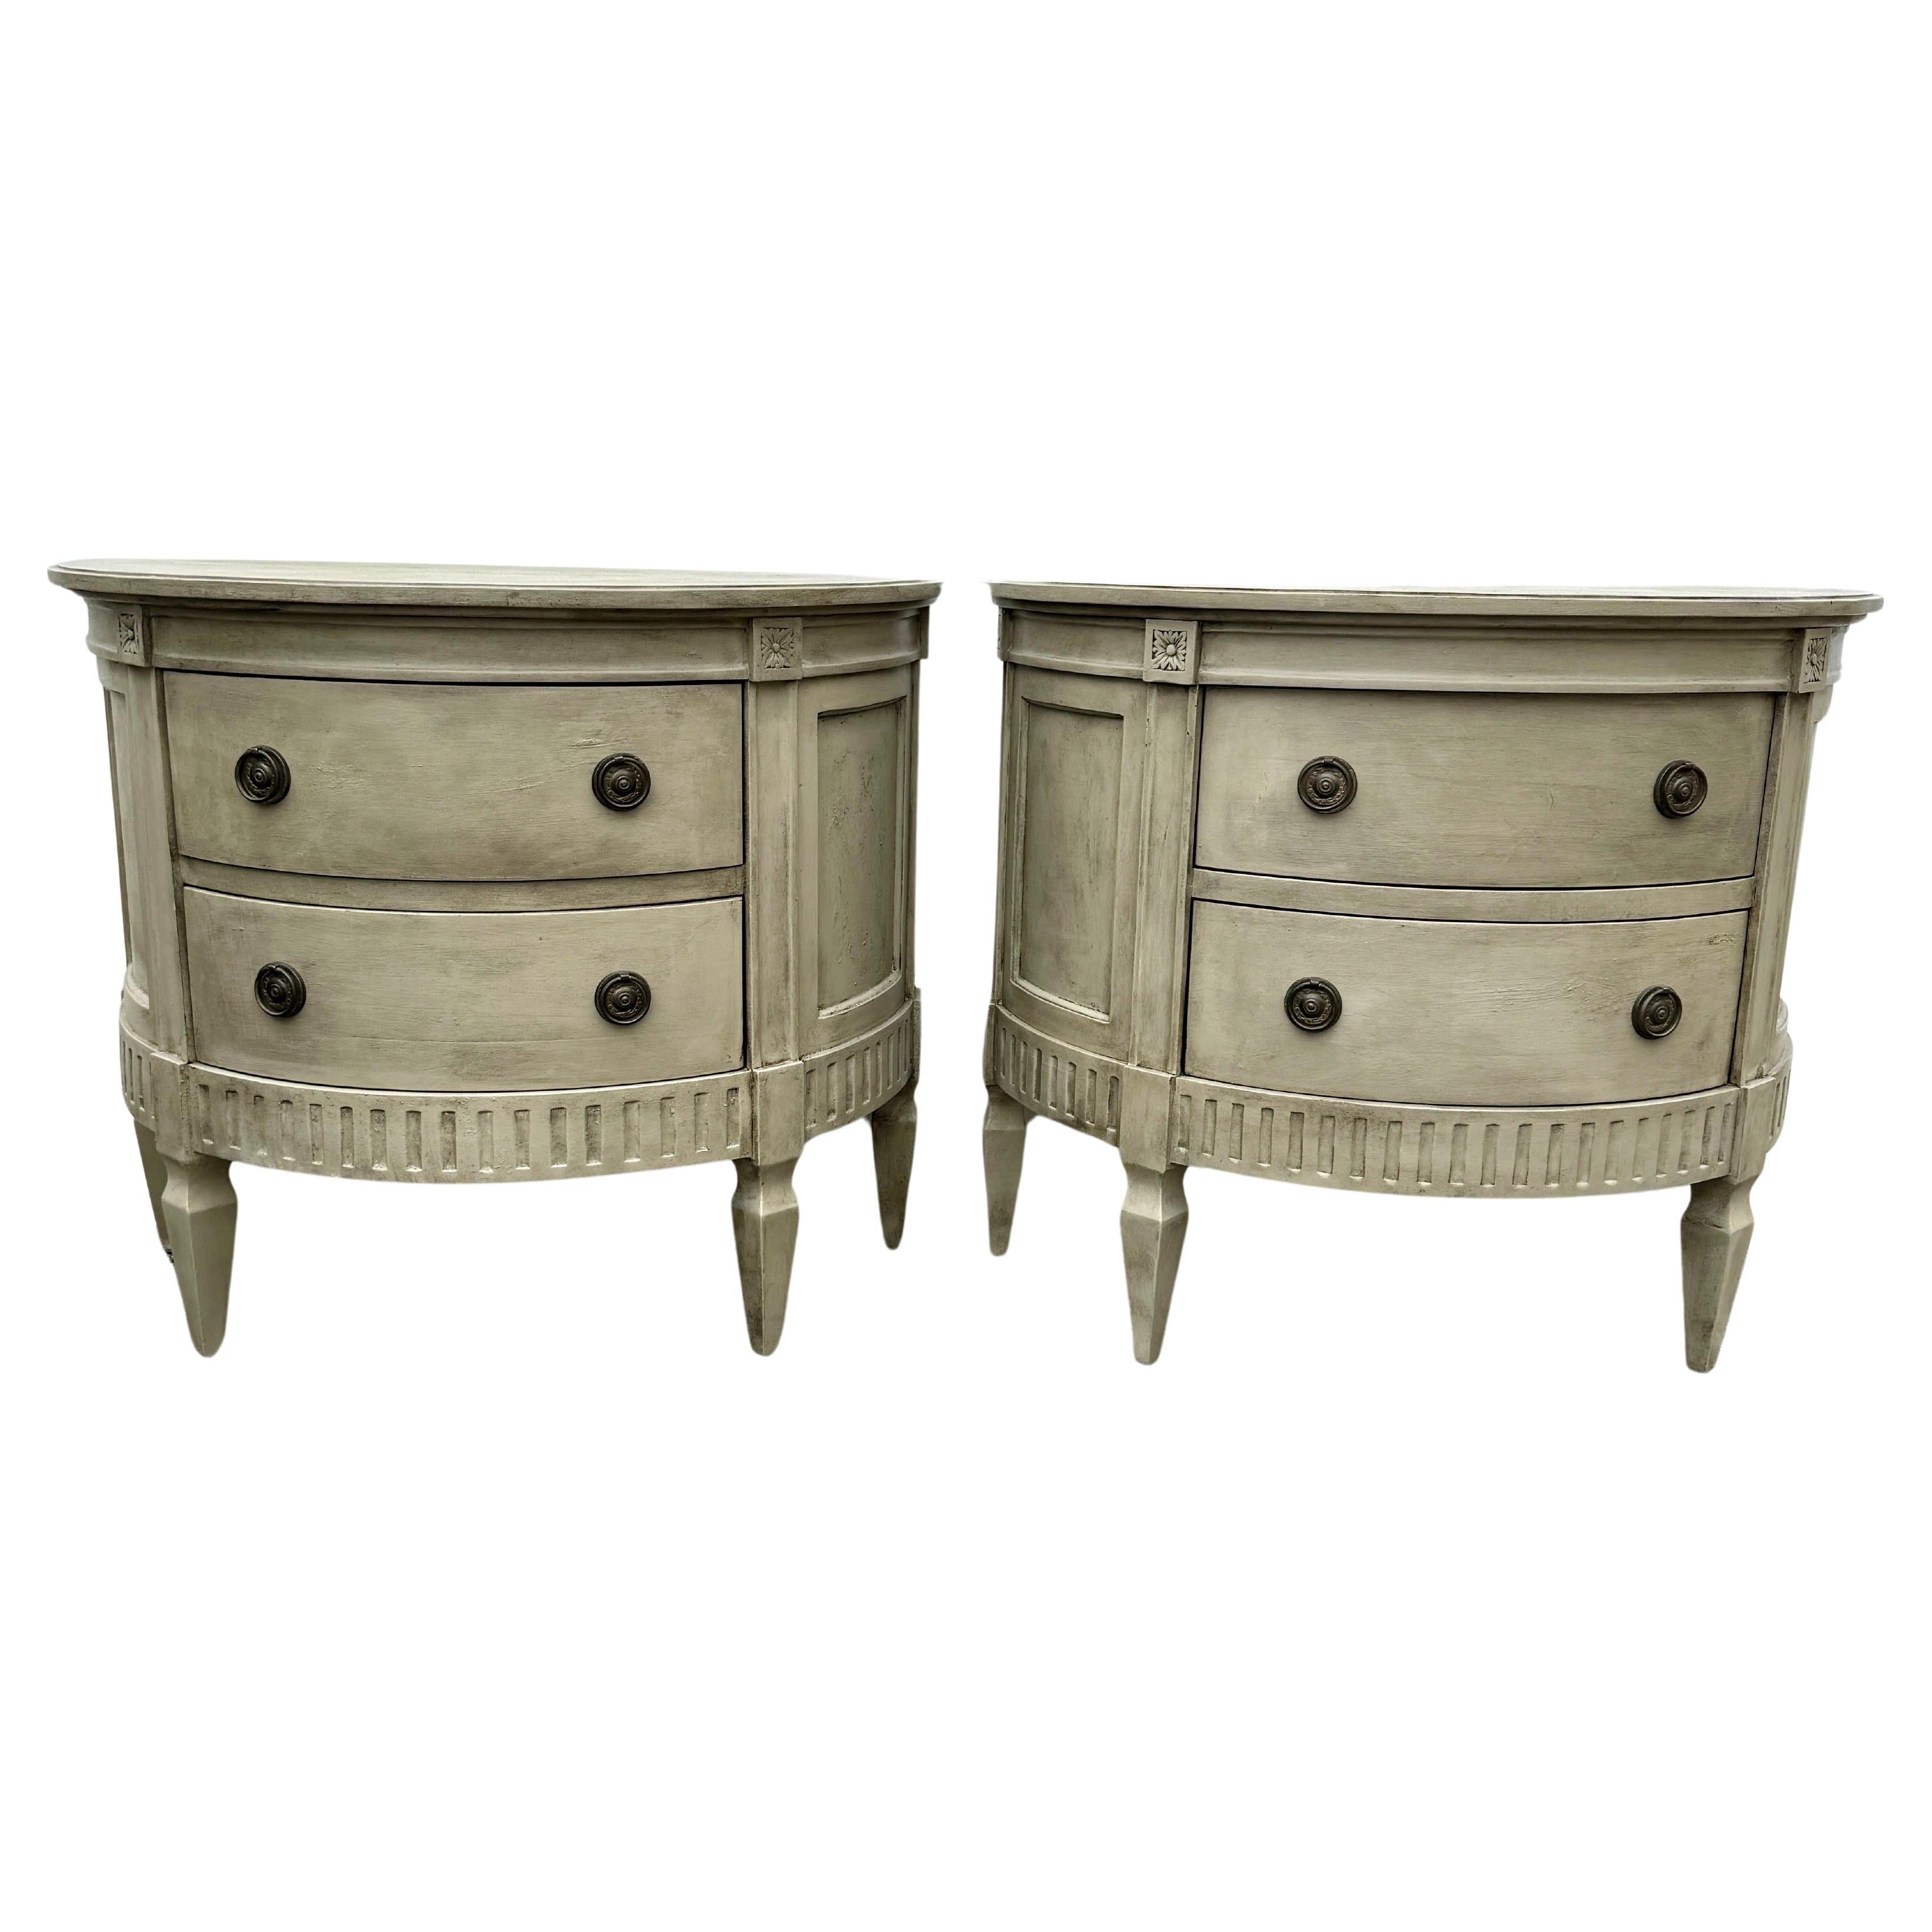 Swedish Gustavian Style Painted Chest of Drawers, A Pair

This classic Swedish style two drawer carved and hand painted neutral gray toned demi lune chests or tables have been constructed from solid wood. Wonderful details on this set including a